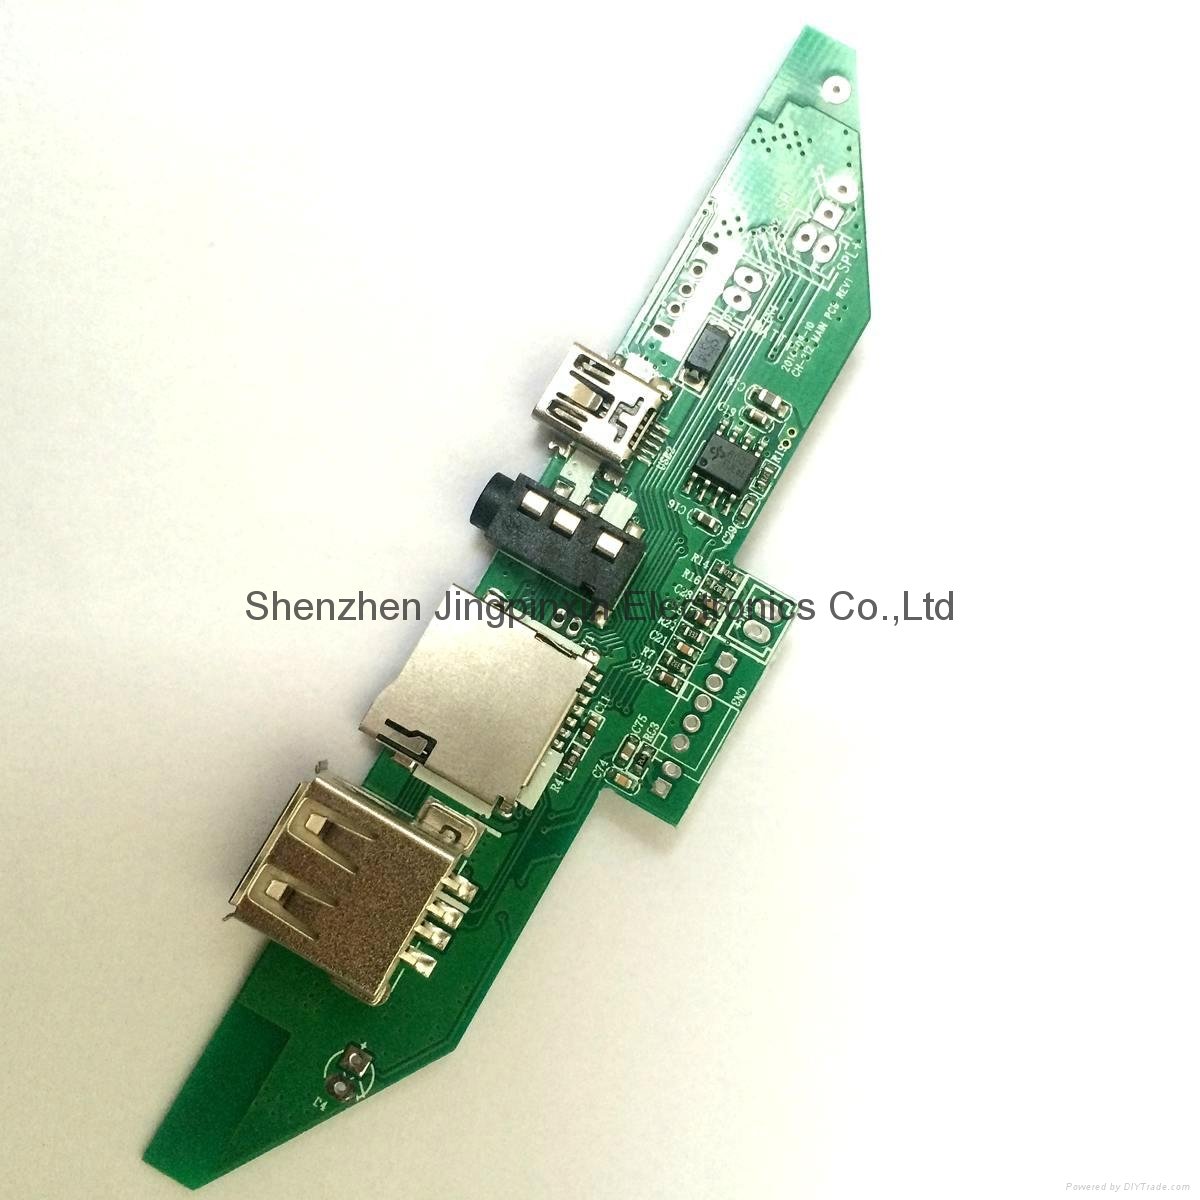 PCB Assembly For Story Machine 2